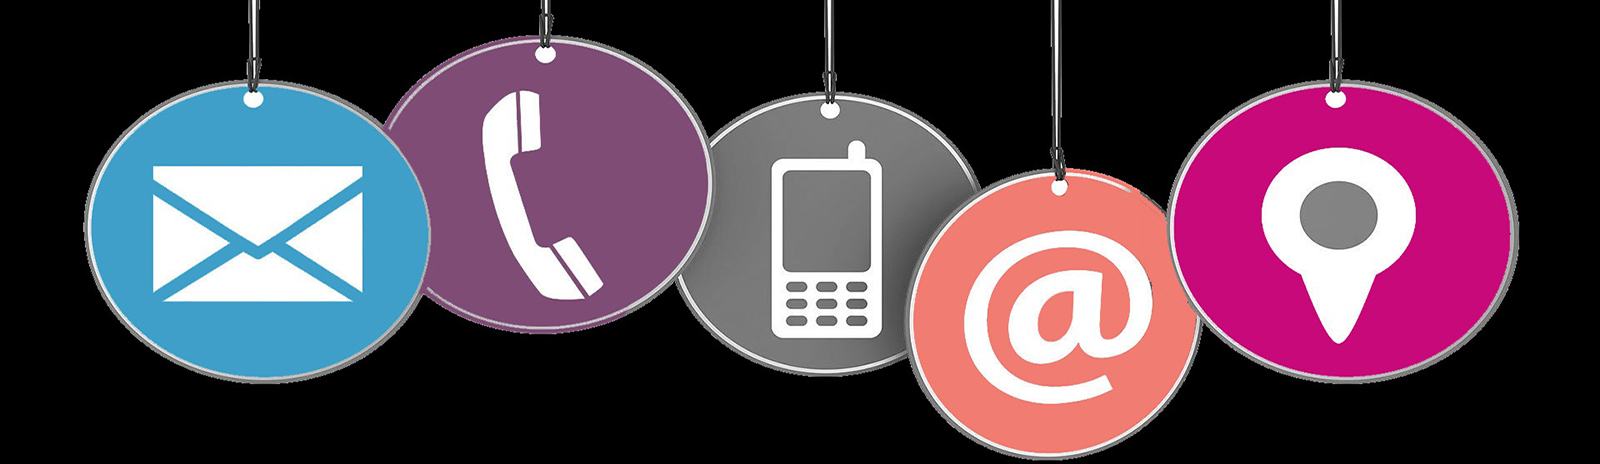 circle icons showing an envelope, telephone, cell phone, at symbol, and location marker